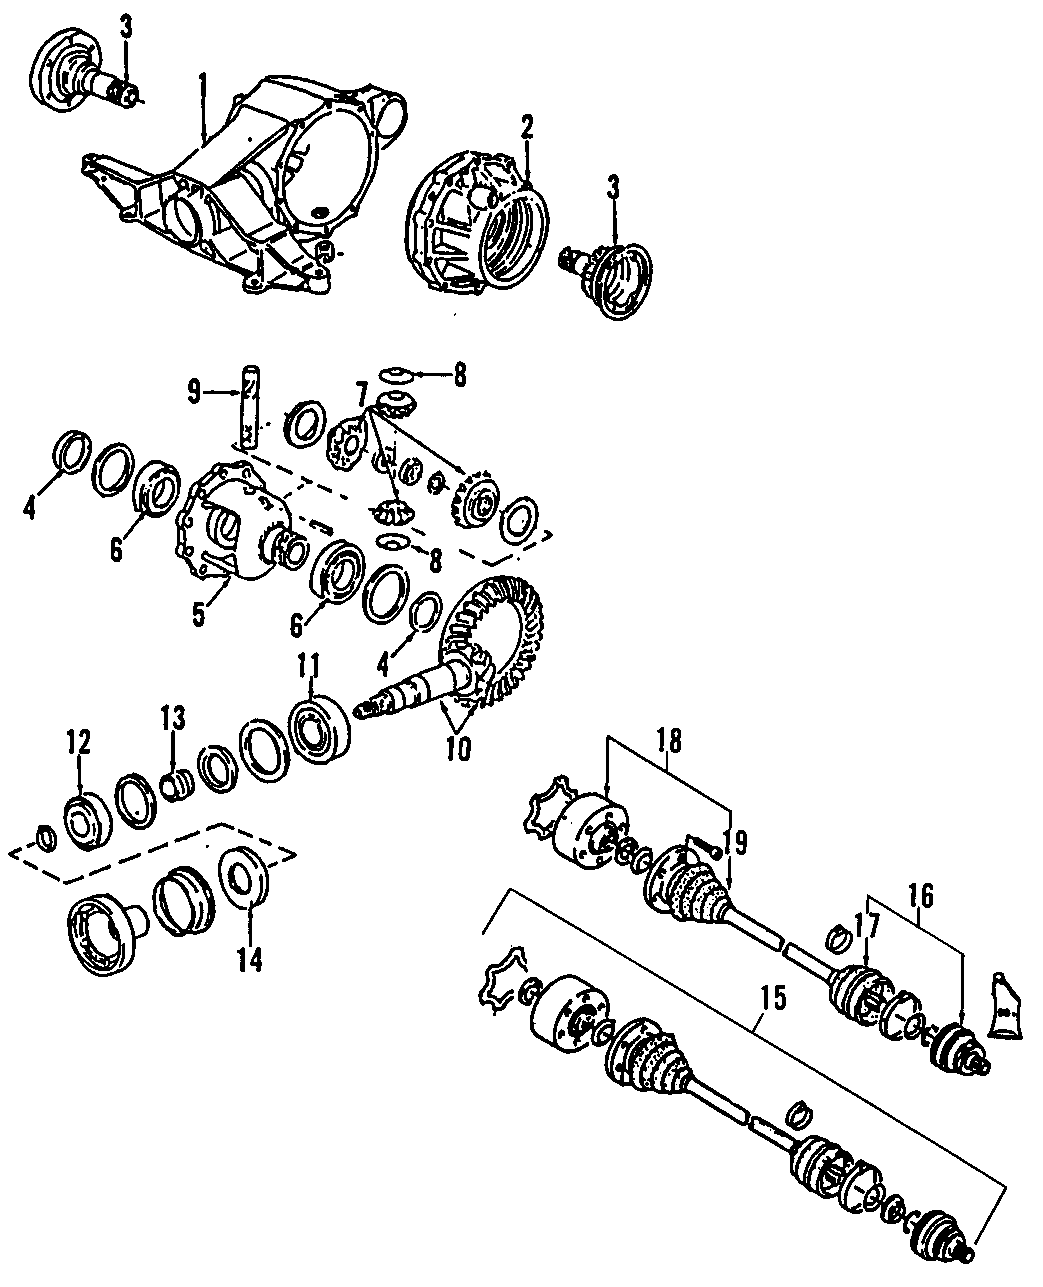 18DRIVE AXLES. REAR AXLE. AXLE SHAFTS & JOINTS. DIFFERENTIAL. PROPELLER SHAFT.https://images.simplepart.com/images/parts/motor/fullsize/E255240.png